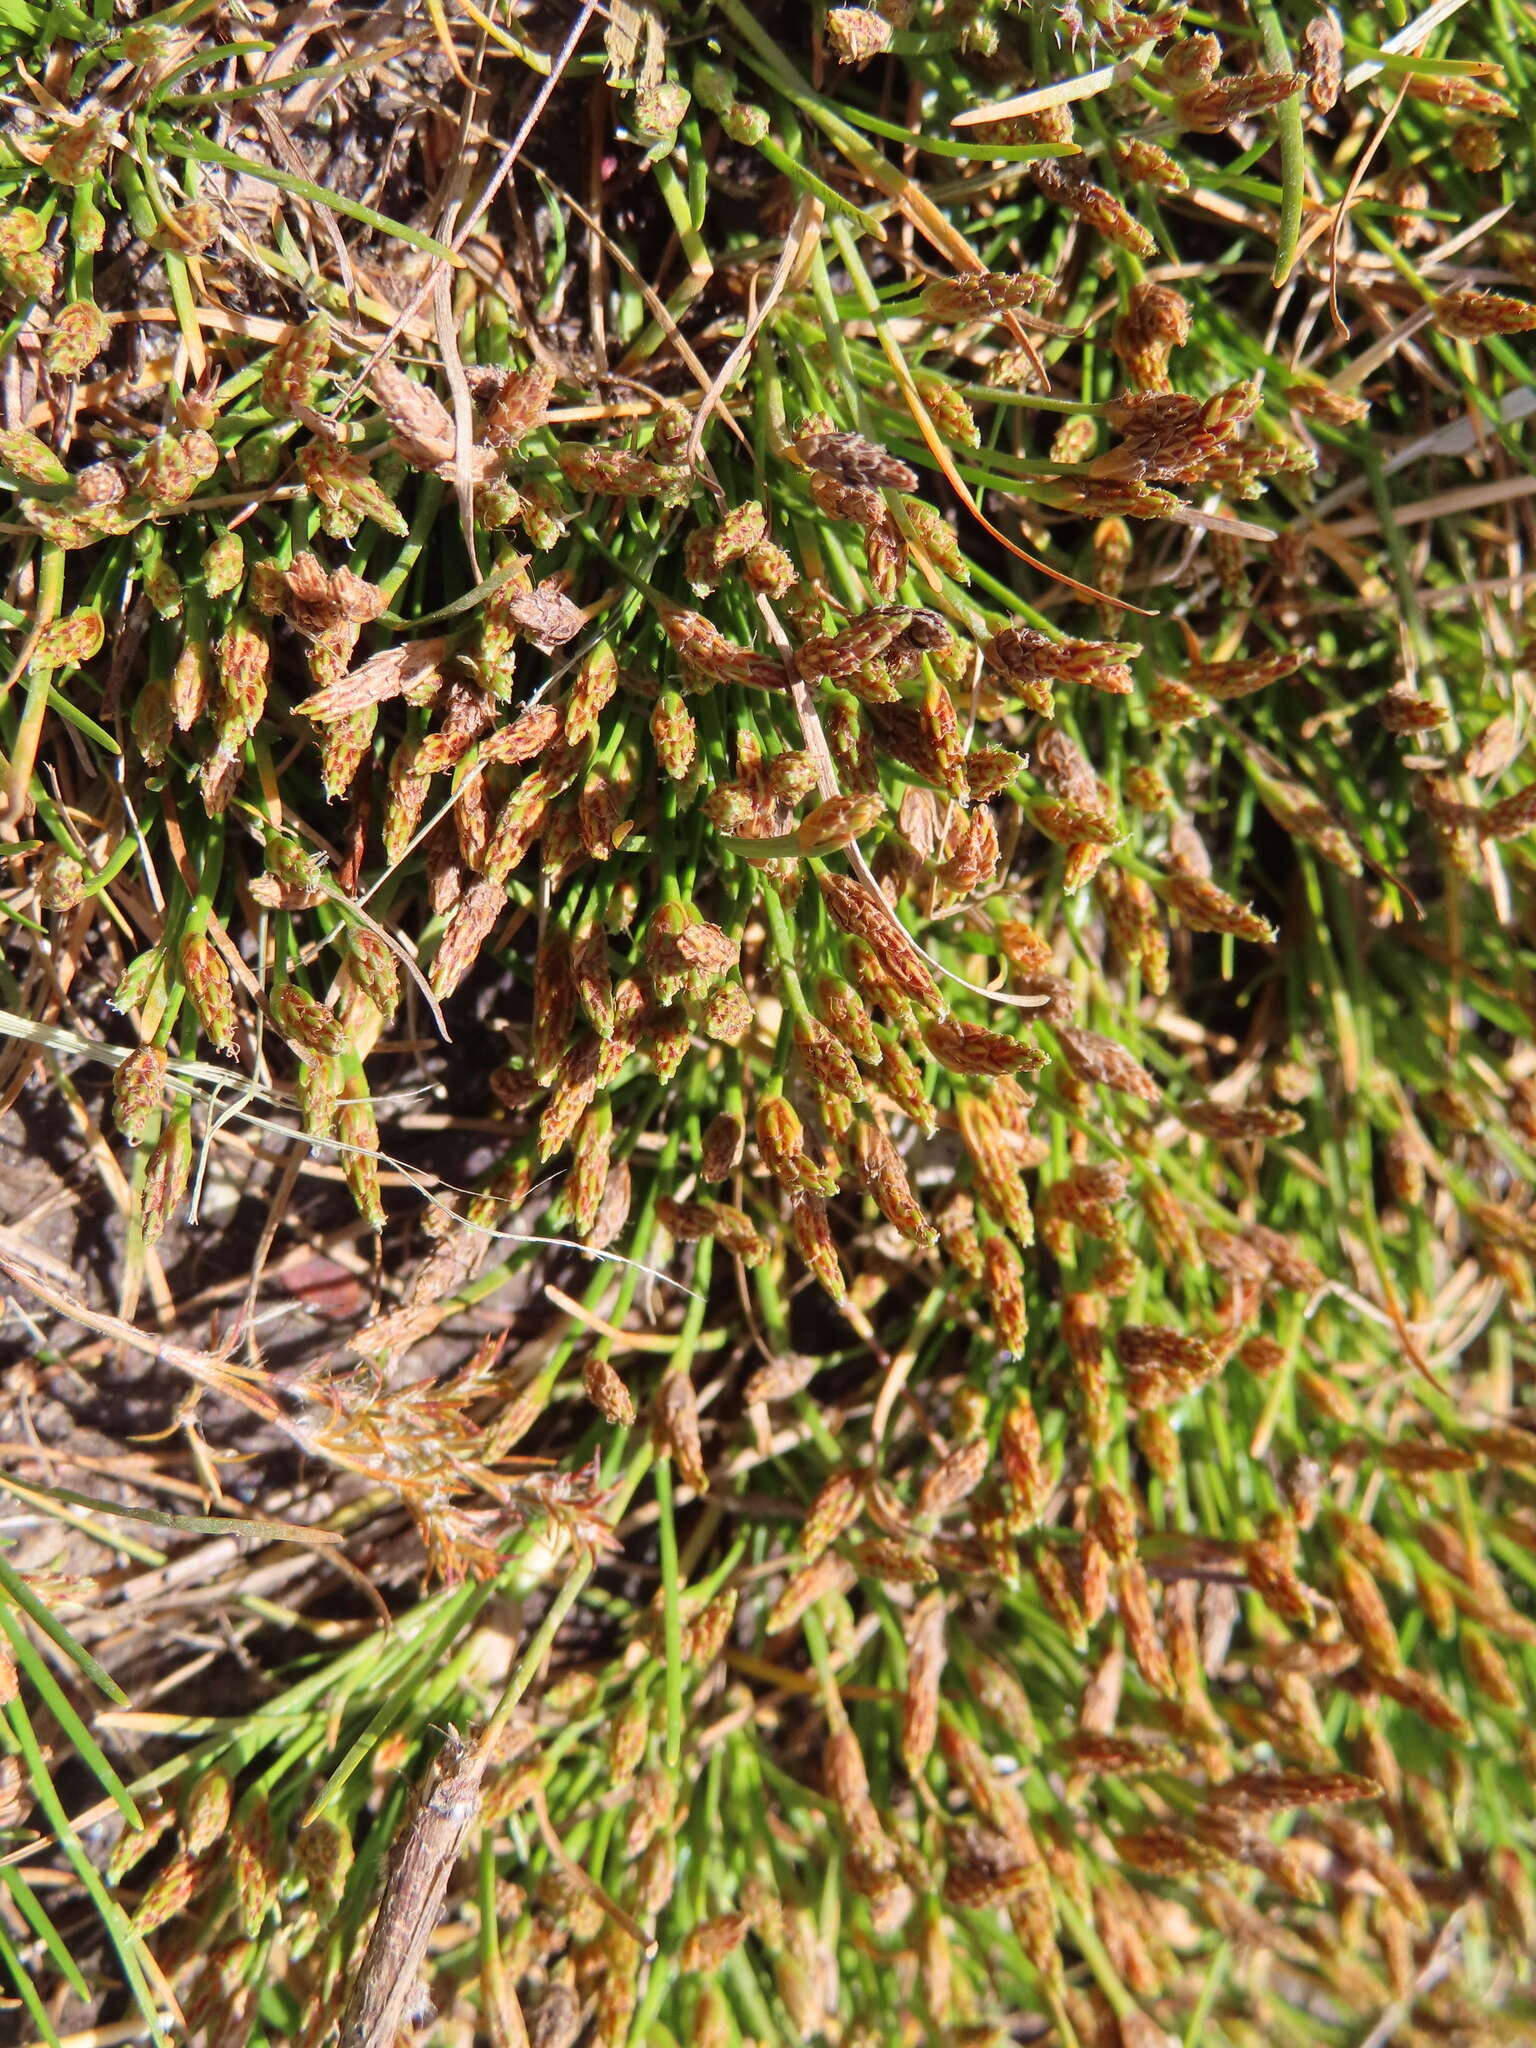 Image of Isolepis ludwigii (Steud.) Kunth